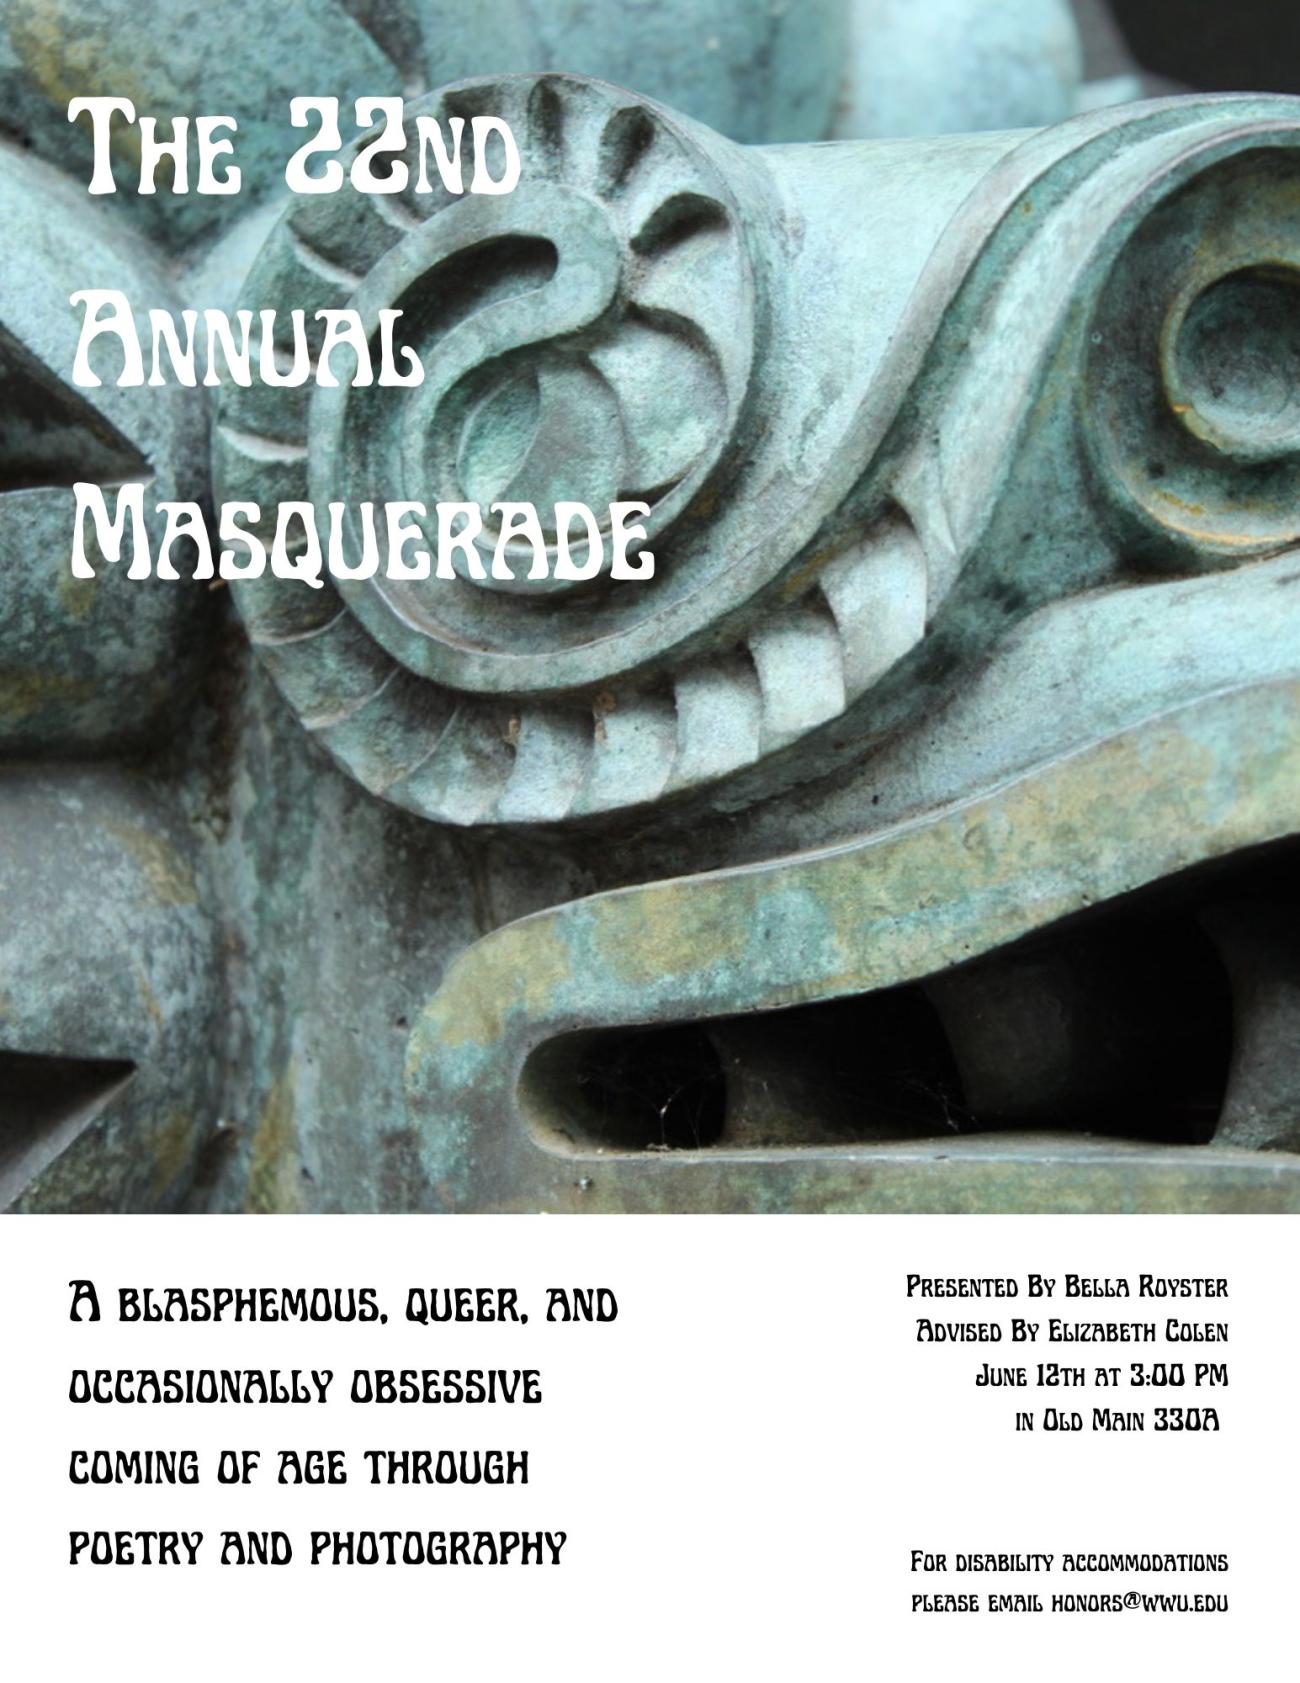 A large photograph covers three quarters of the poster, with white space over the rest. The photo displays a zoomed in copper mask, corroded greed and covered in blemishes. “The 22nd Annual Masquerade. A blasphemous, queer, and occasionally obsessive coming of age through poetry and photography. Presented By Bella Royster. Advised By Elizabeth Colen. June 12th at 3:00 PM in Old Main 330A. For disability accommodations please email honors@wwu.edu.”